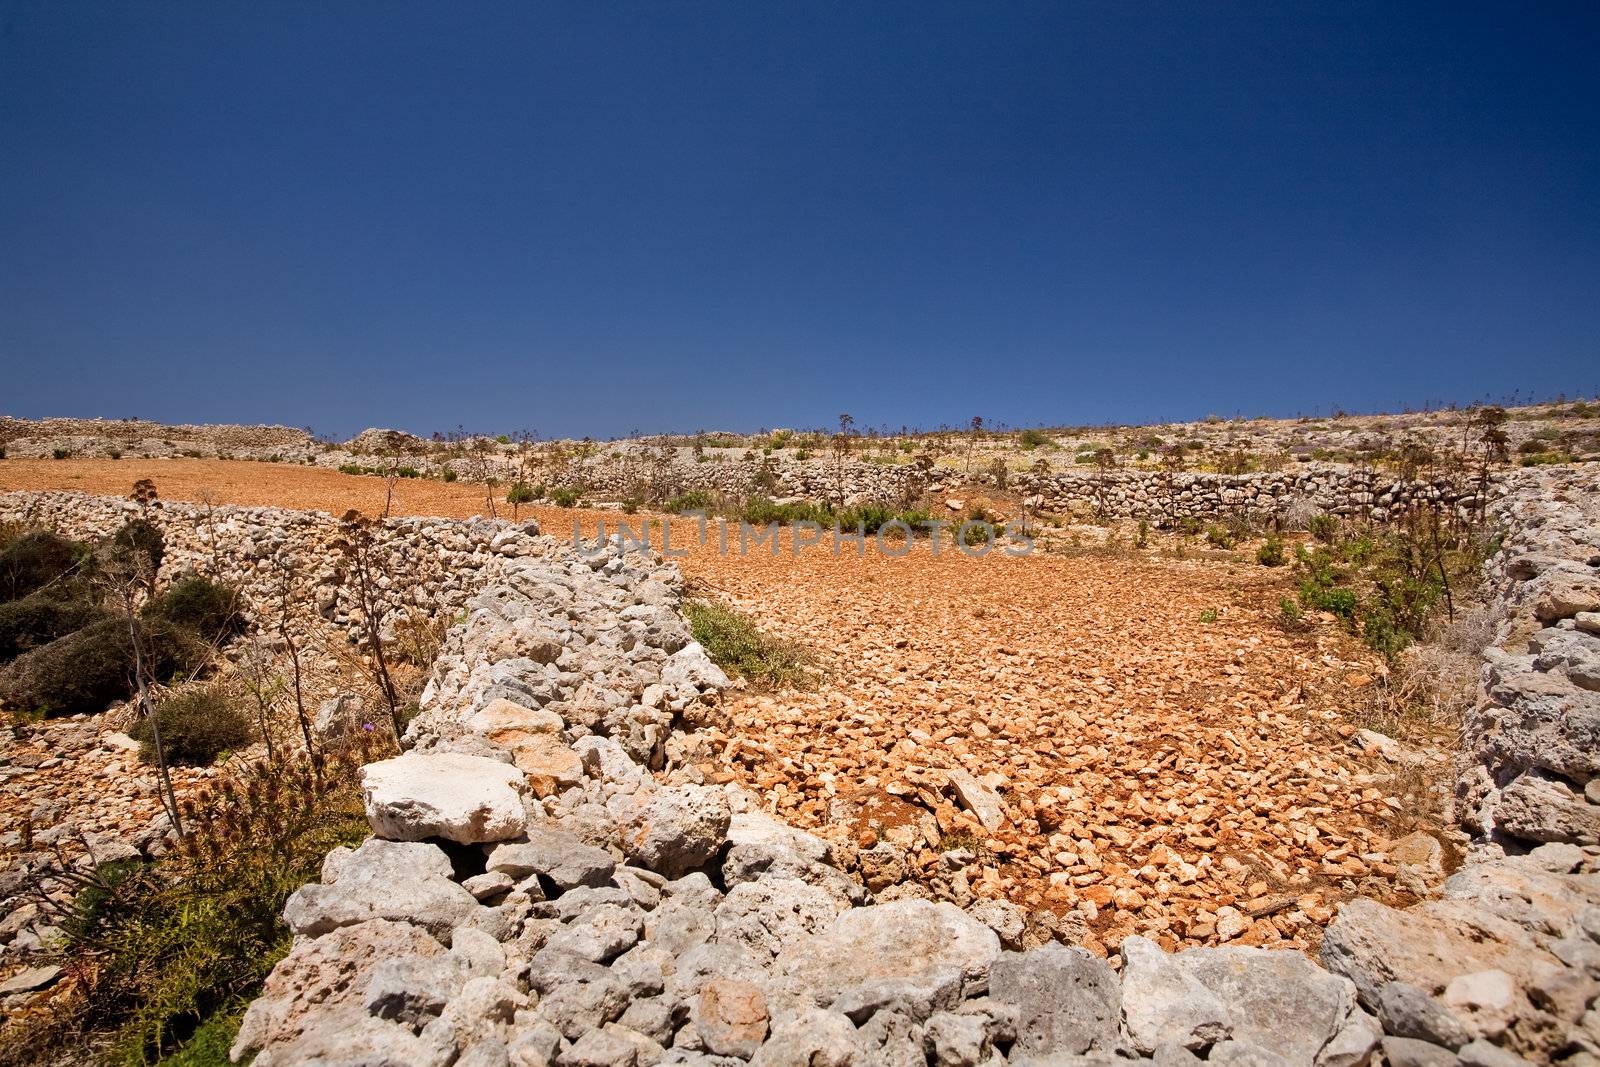 Farmland filled with rocks and red soil